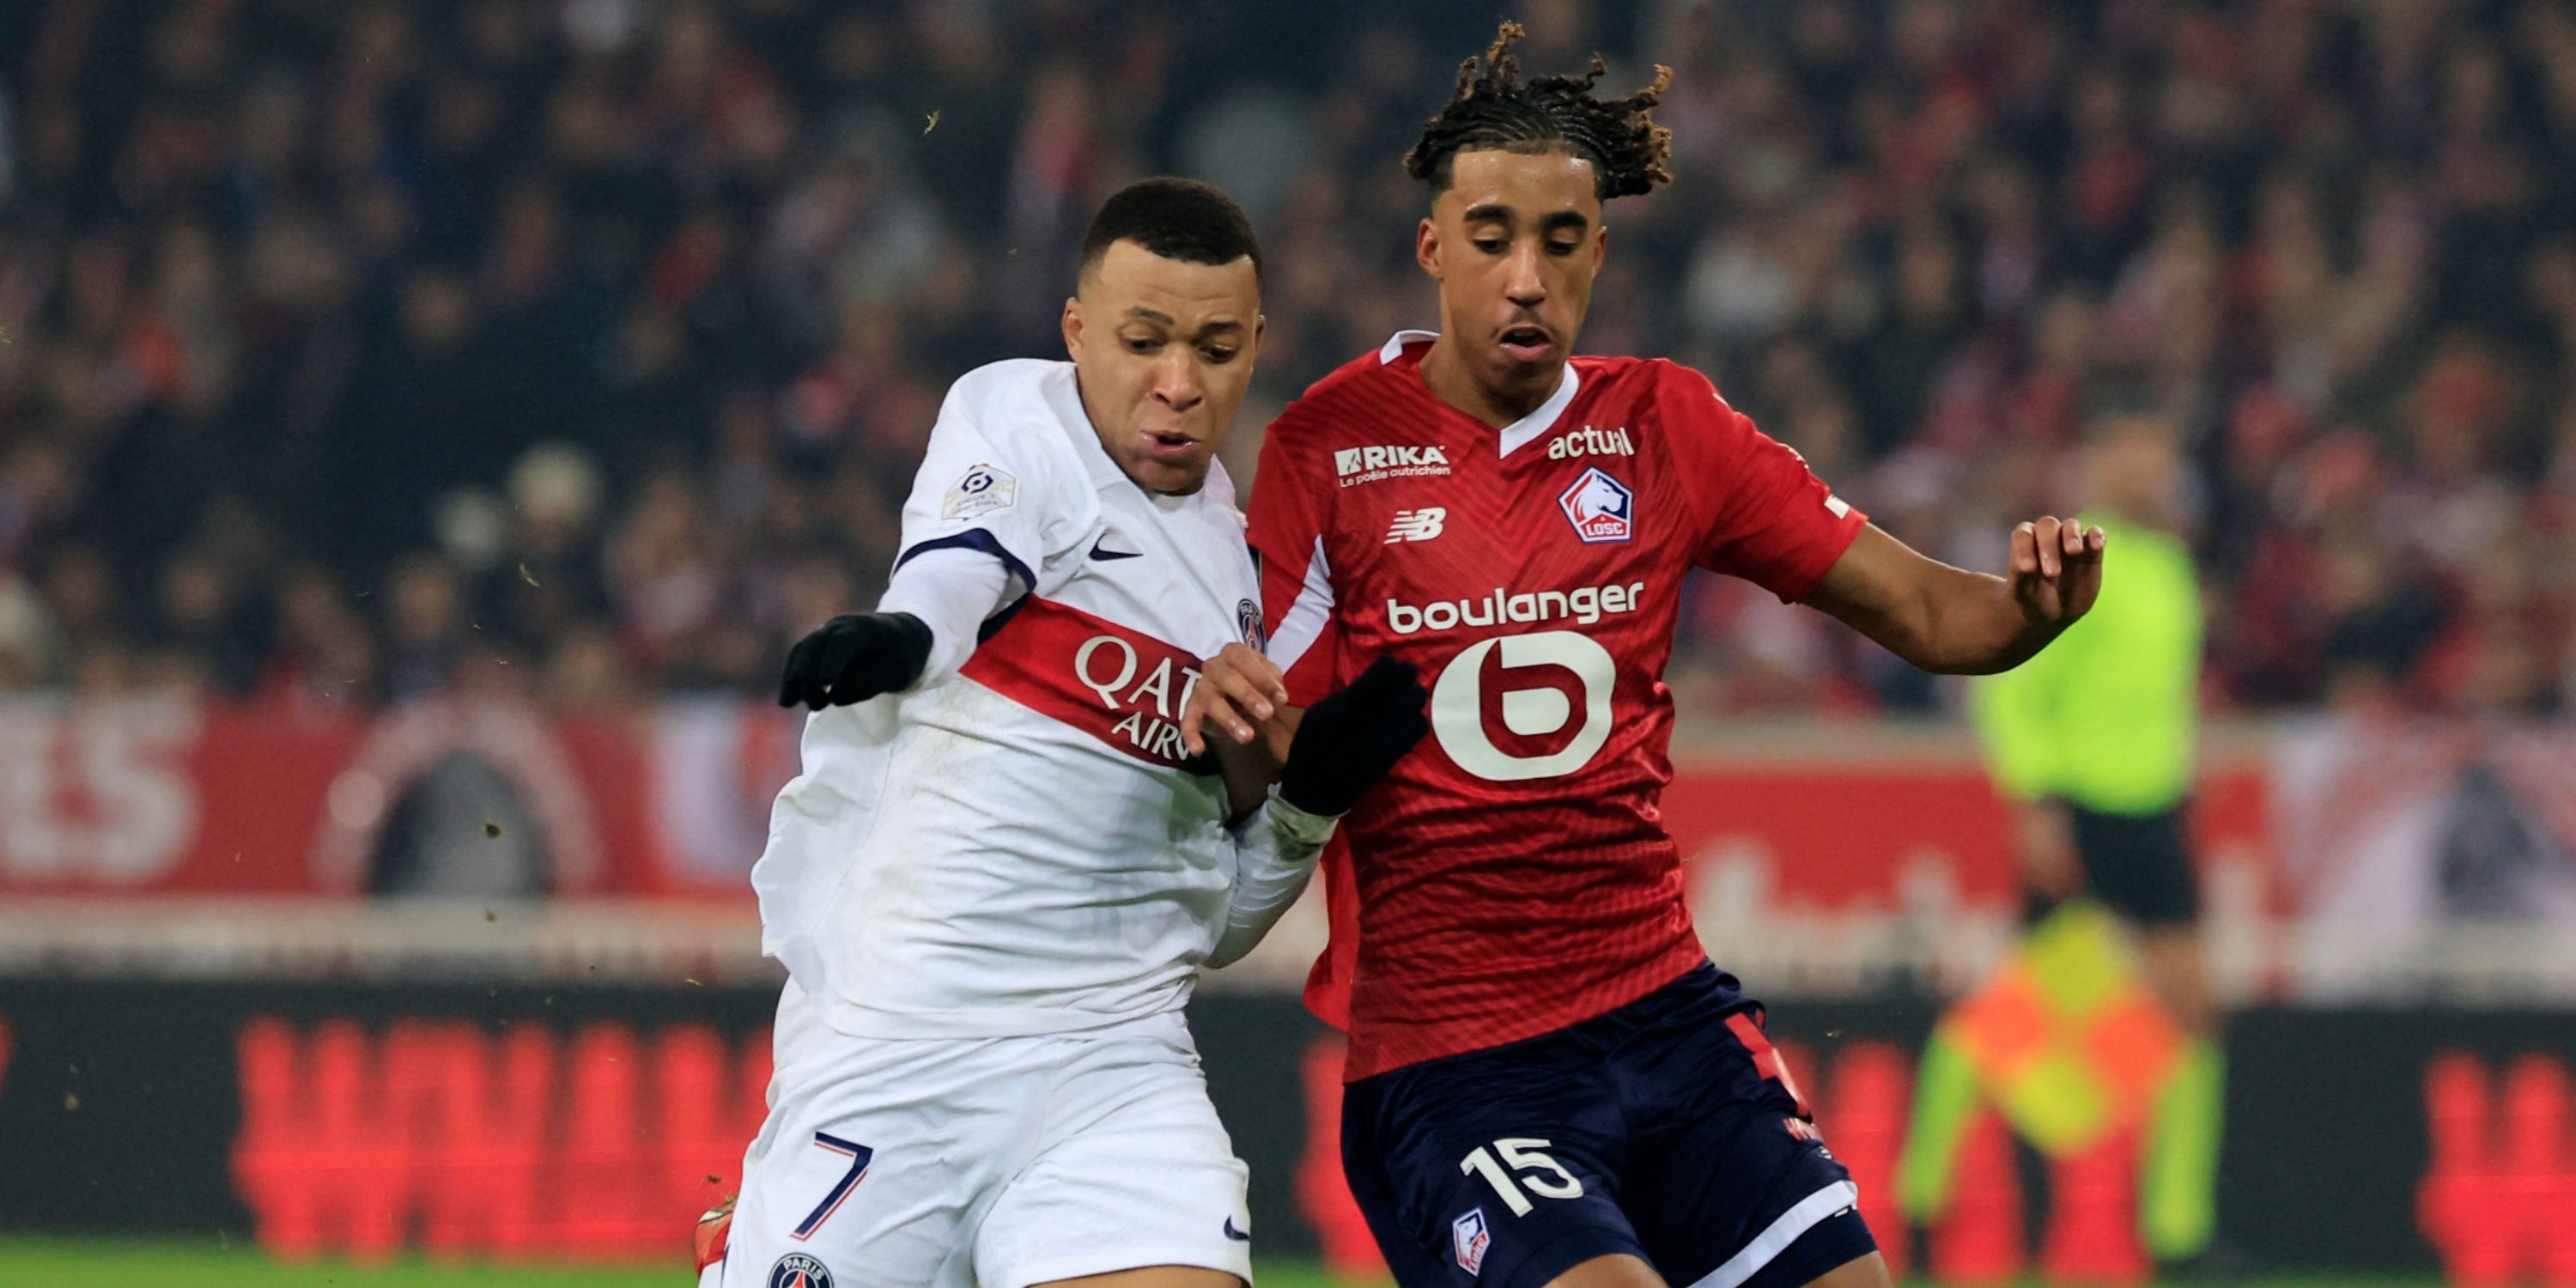 Paris Saint-Germain forward Kylian Mbappe in action with Lille centre-back Leny Yoro